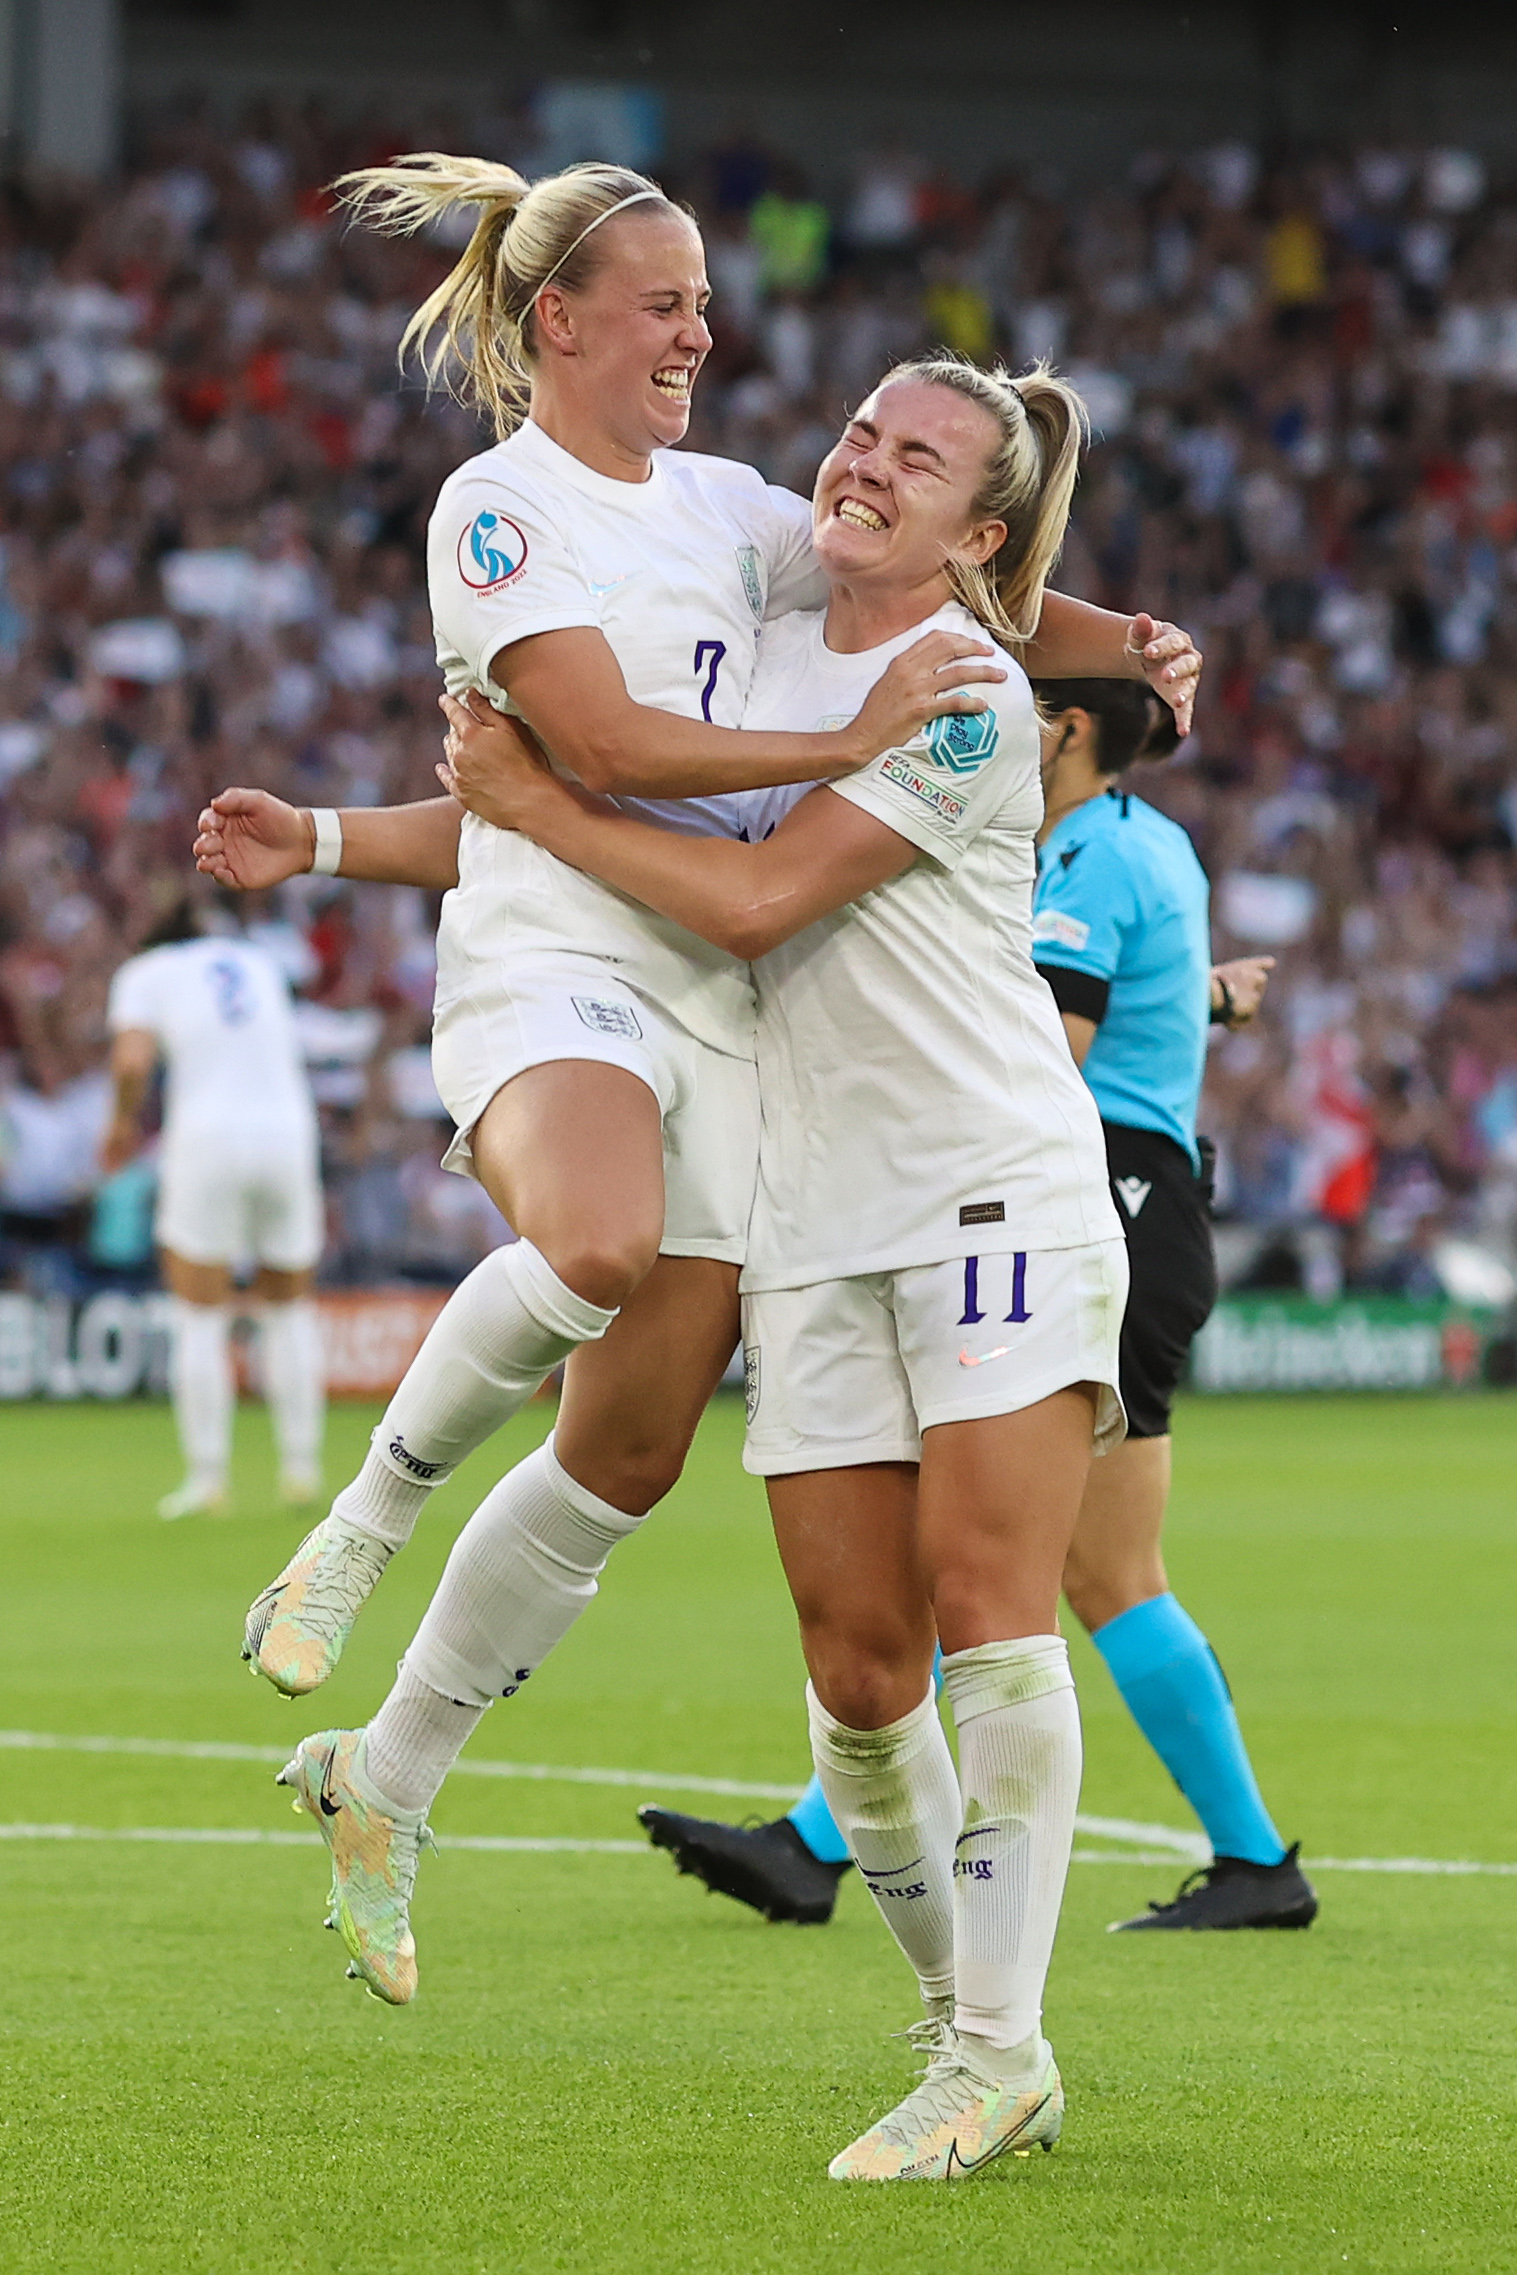 Arsenal Women's attacker Beth Mead strikes again as England make perfect start to Euro 2022